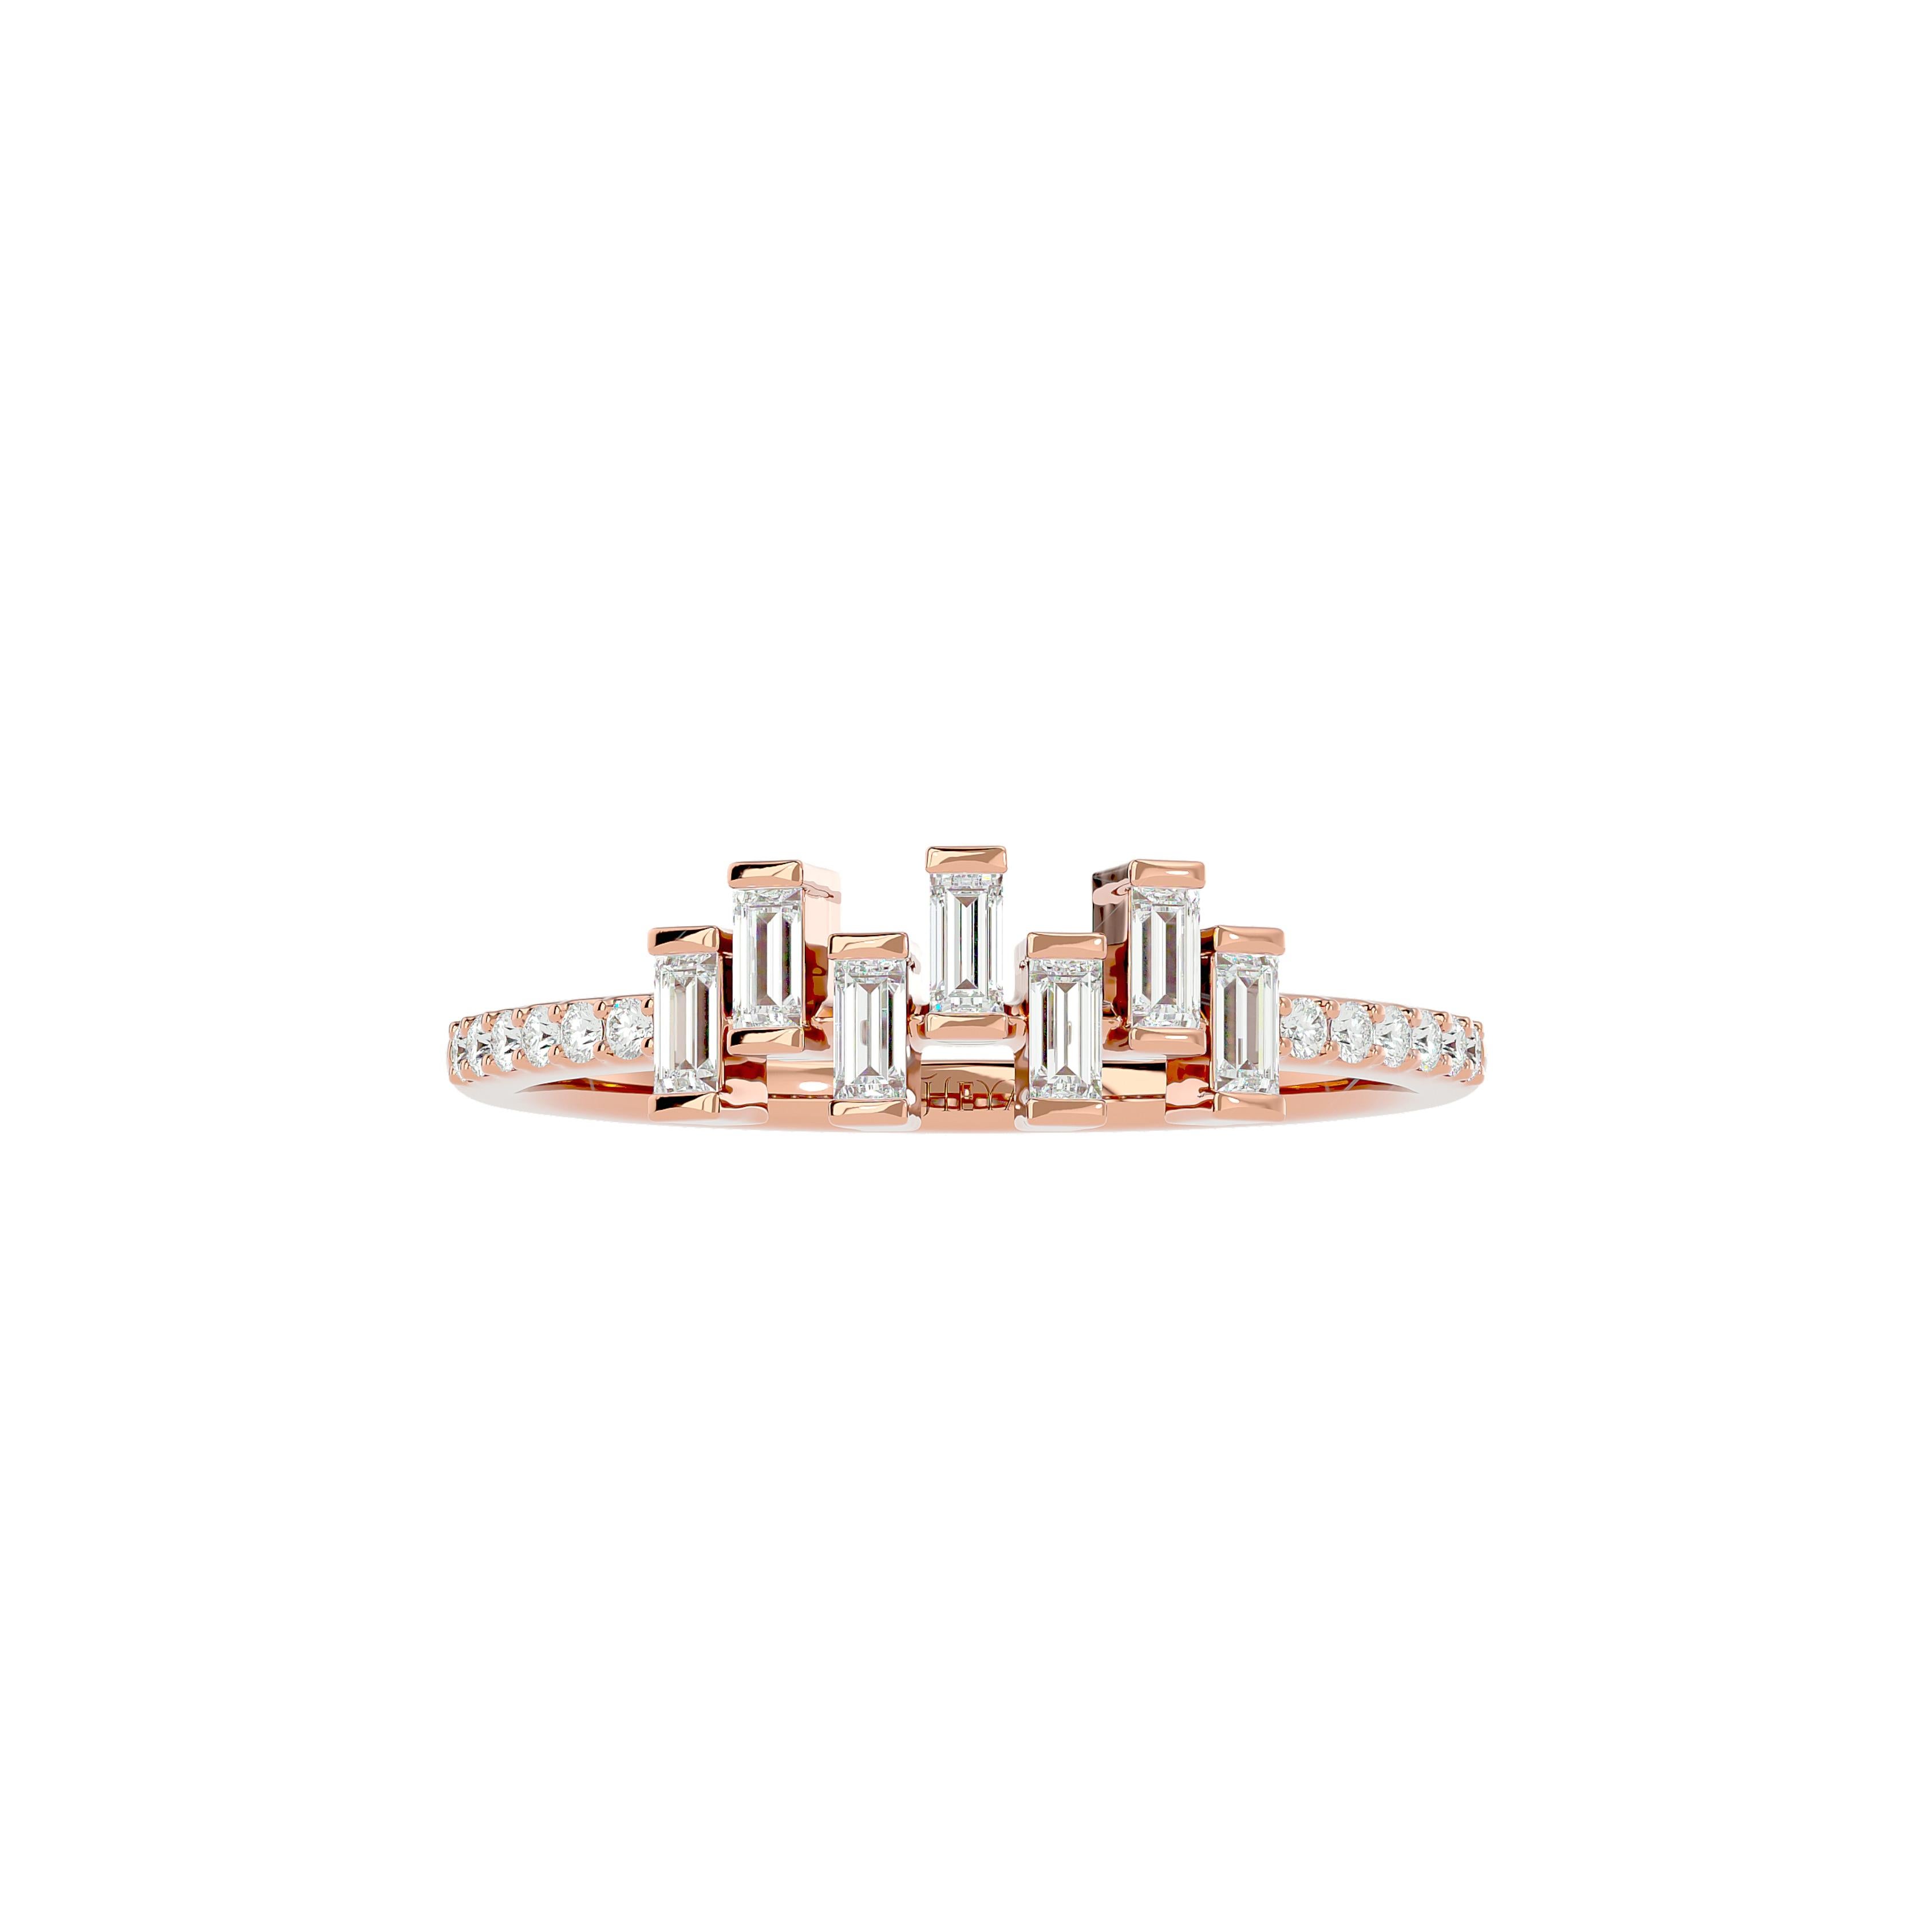 Elements
Wear the diamonds you love with our Alternating Straight Baguette Diamond Engagement Ring, a timeless combination of beauty and sentiment. Expertly crafted in gold, this piece is sure to impress and turn heads.

Innovation
The most elegant